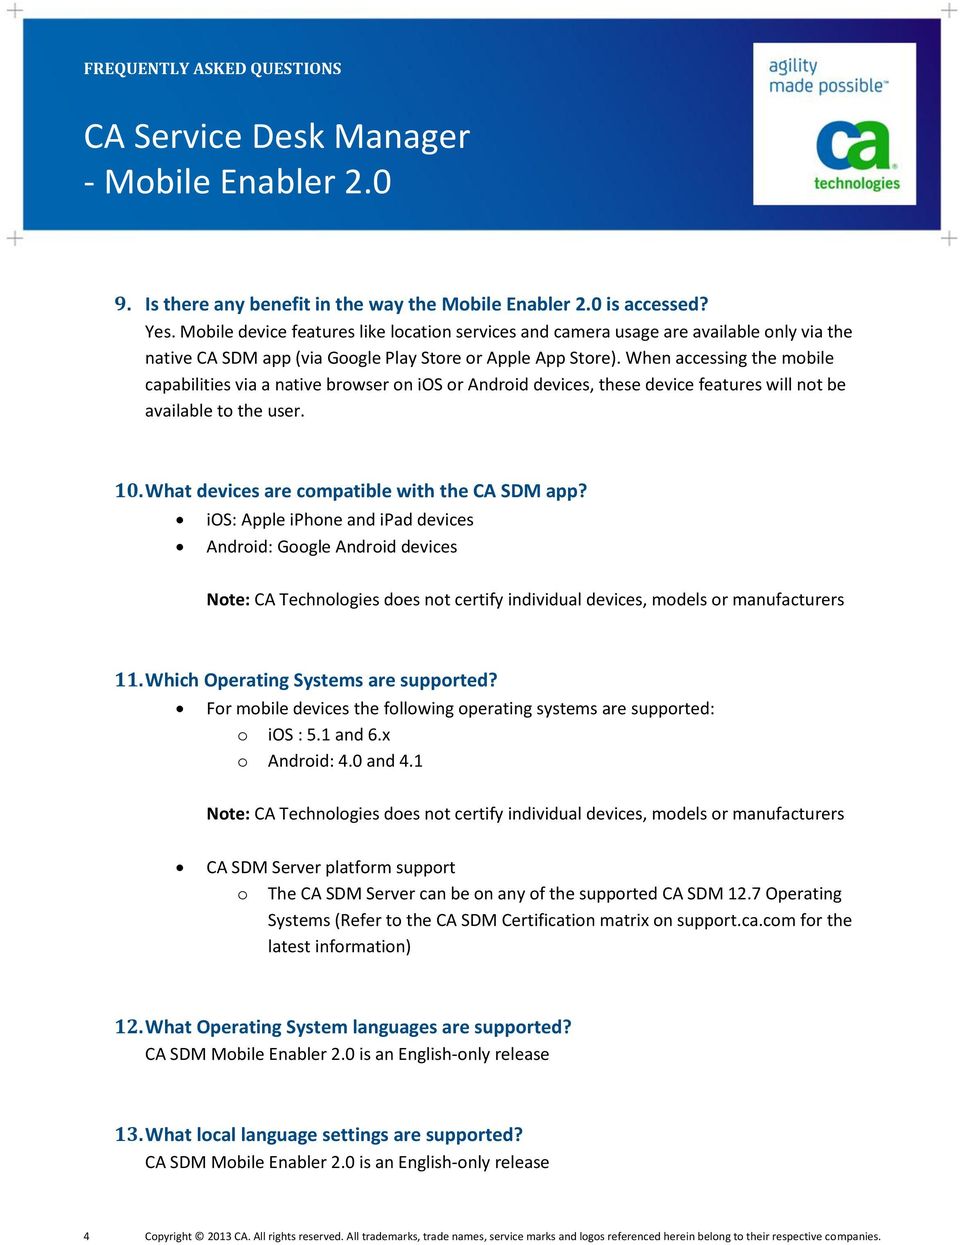 When accessing the mobile capabilities via a native browser on ios or Android devices, these device features will not be available to the user. 10. What devices are compatible with the CA SDM app?